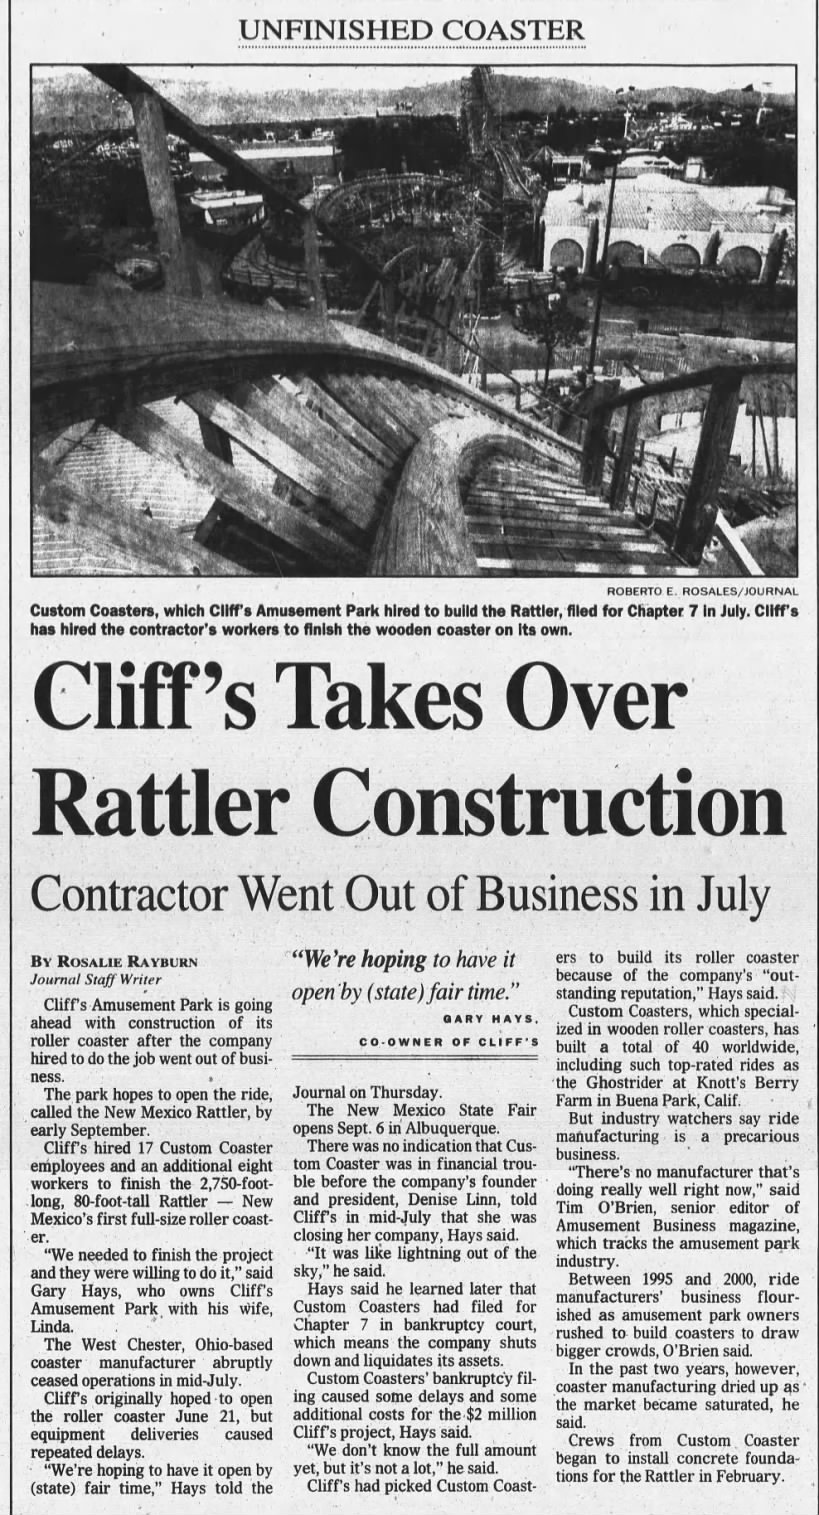 Cliff's Takes Over Rattler Construction/Rosalie Rayburn